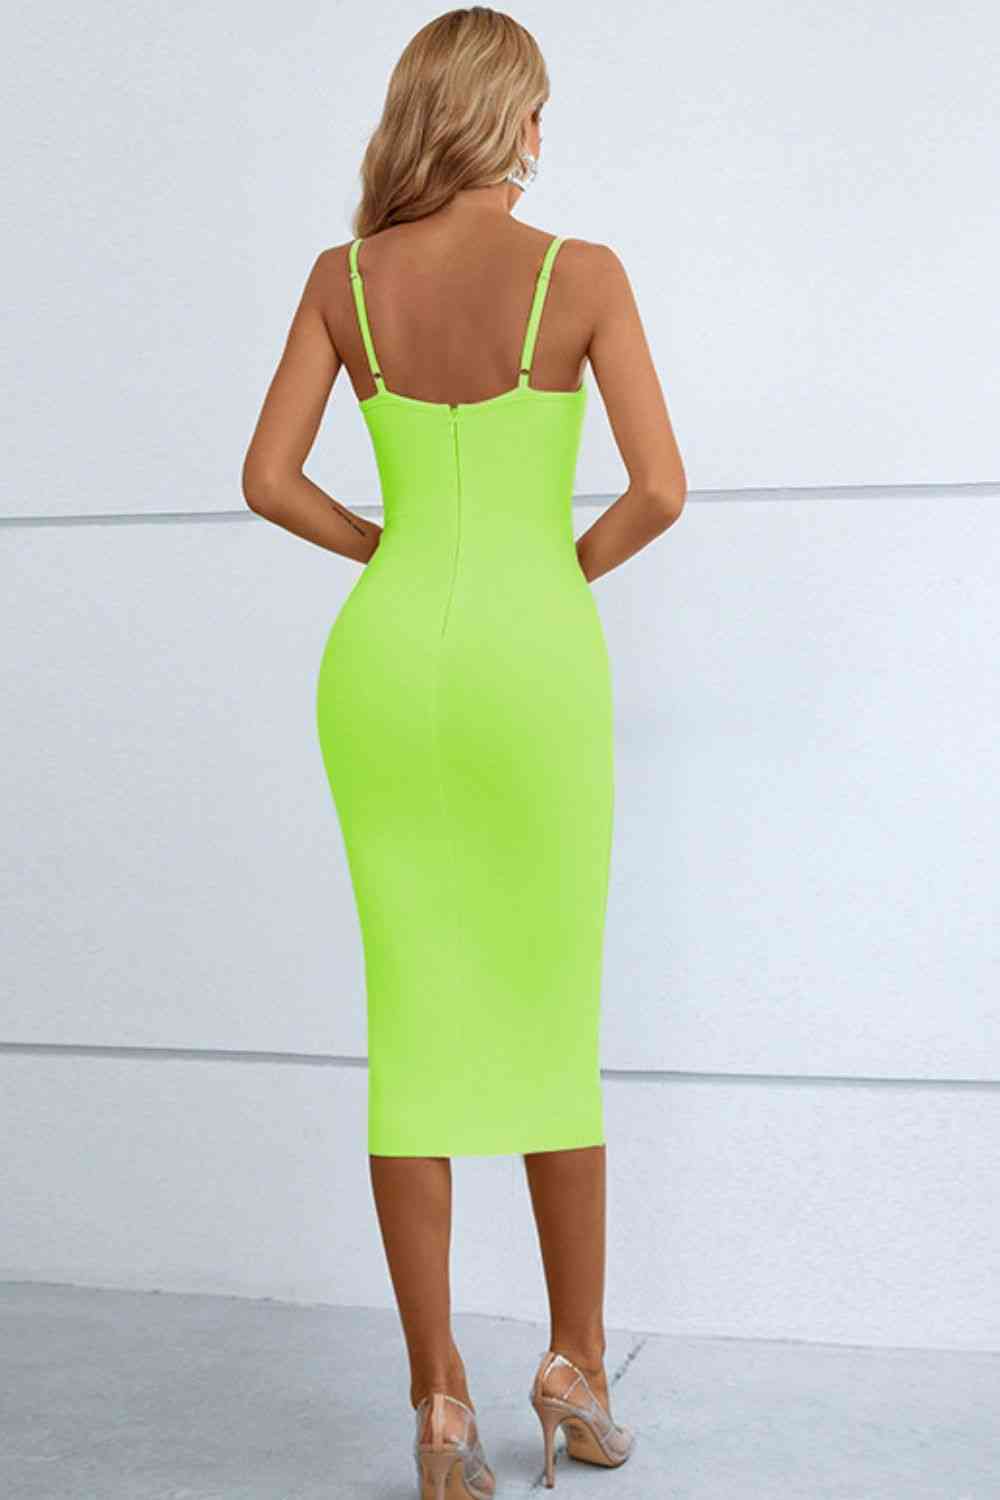 a woman in a neon green dress